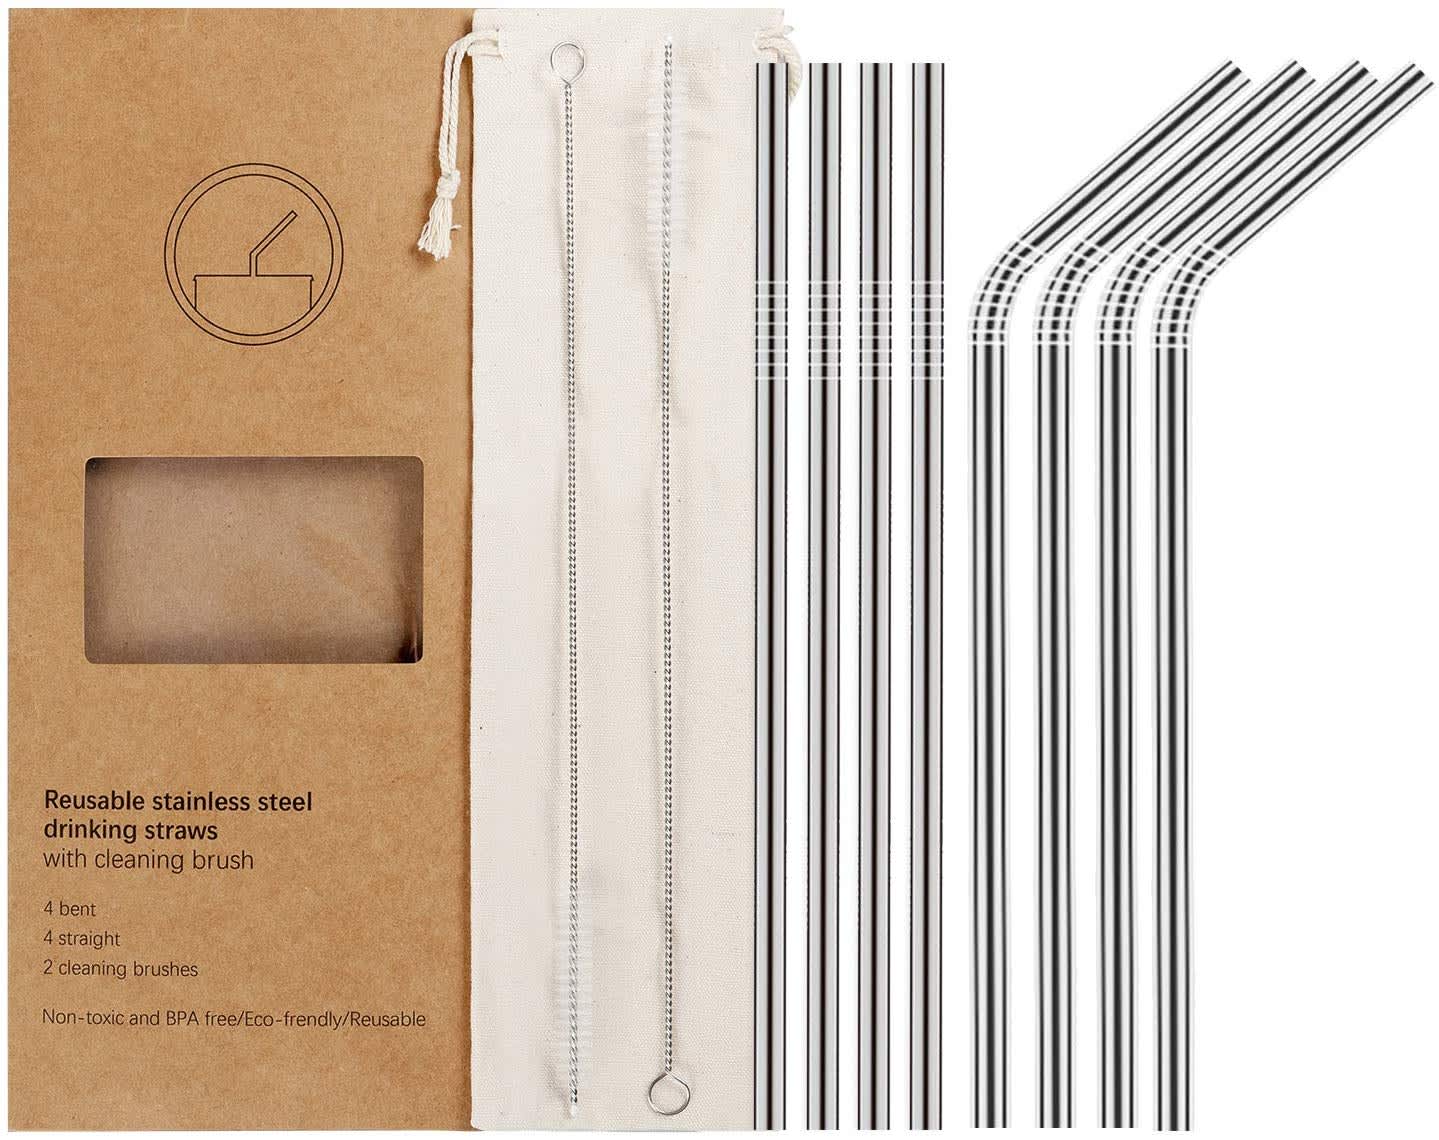 Icooker 8 Pack Stainless Steel Straws - Long Drinking Straws with Travel Case and 2 Cleaning Brush, Eco Friendly Reusable Metal Straw for 20 30 oz